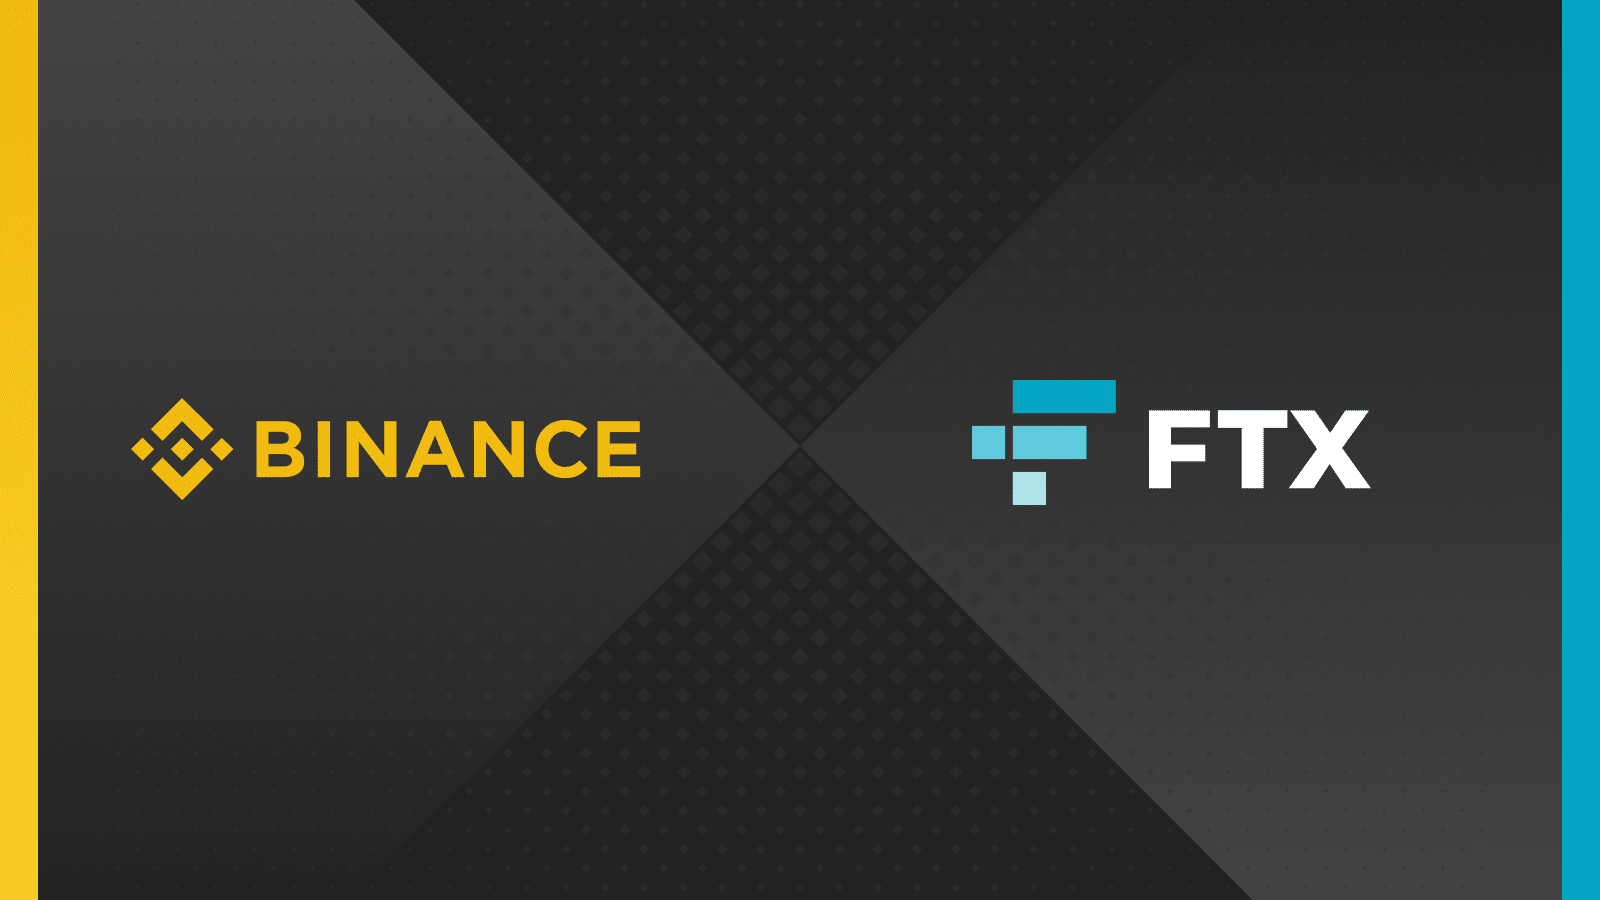 Binance confirms it will not buy FTX